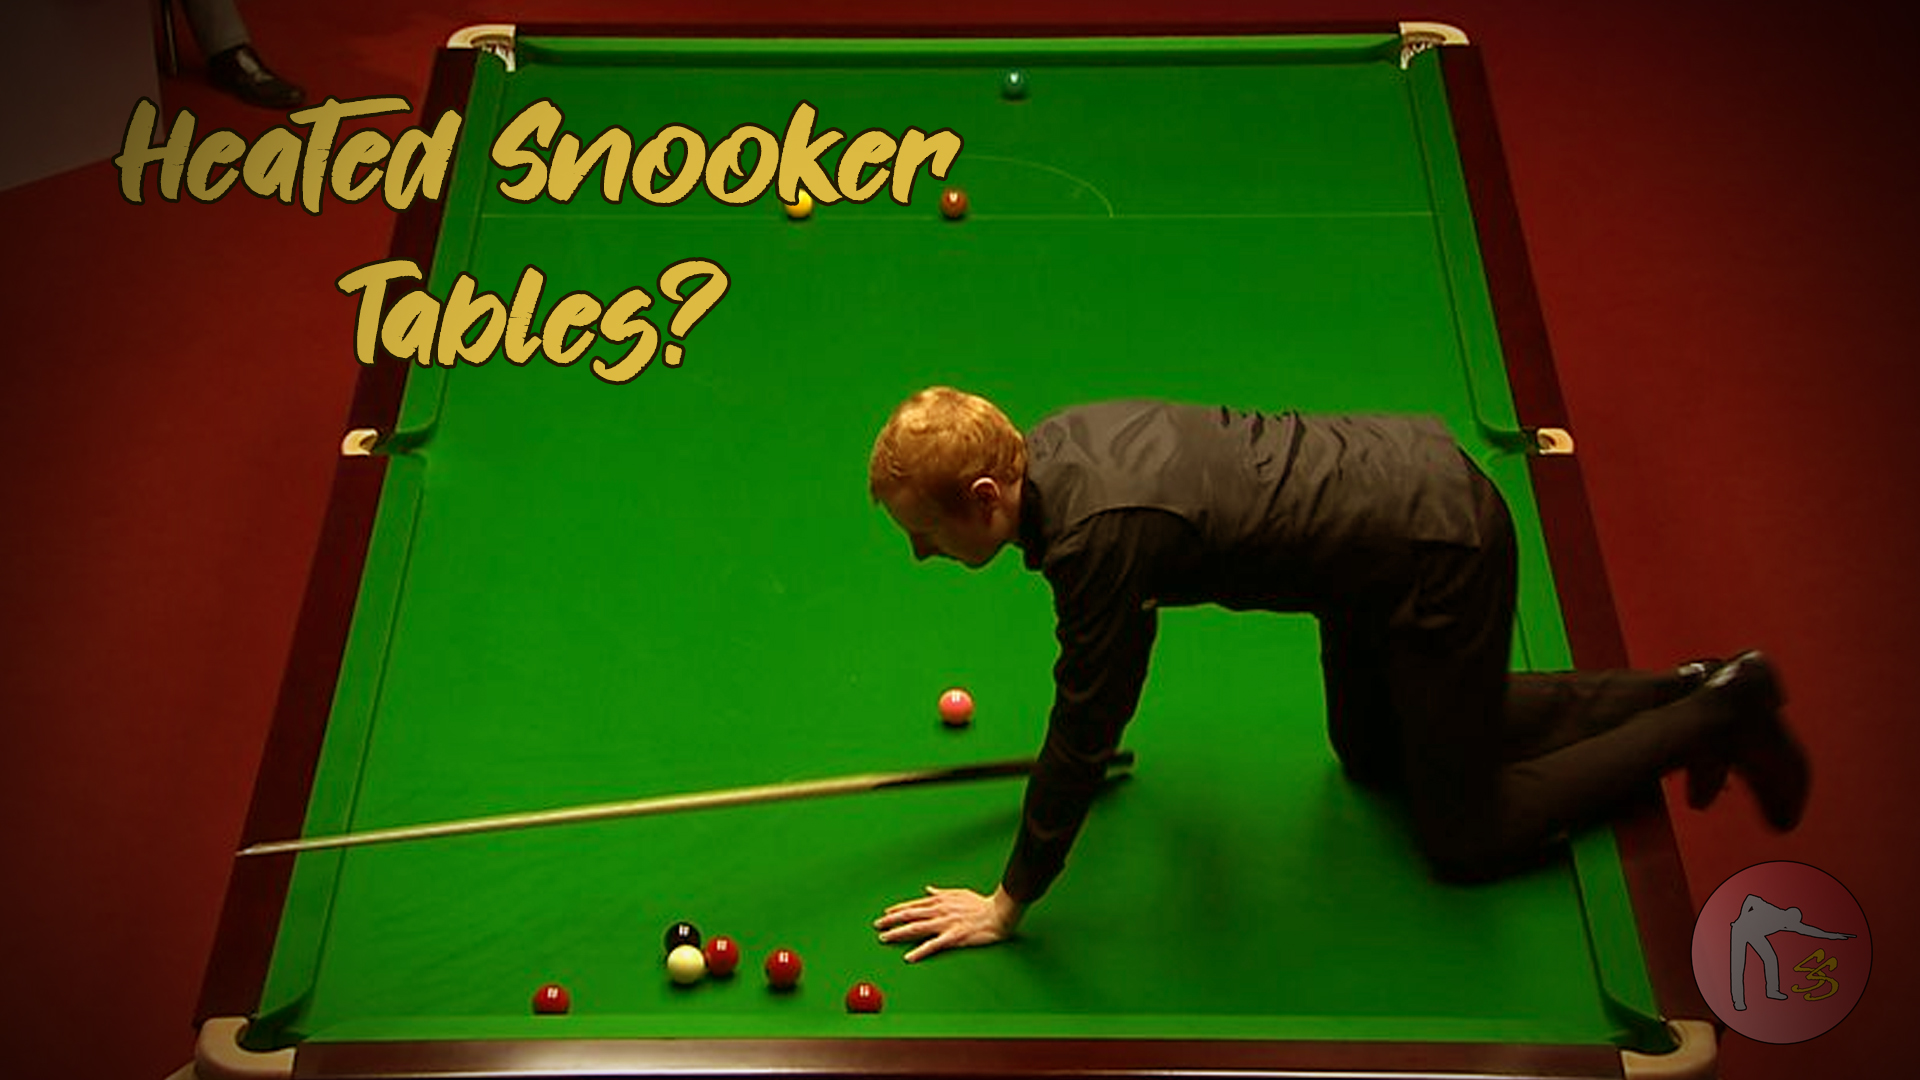 Why are Snooker tables heated? — Snooker Shorts